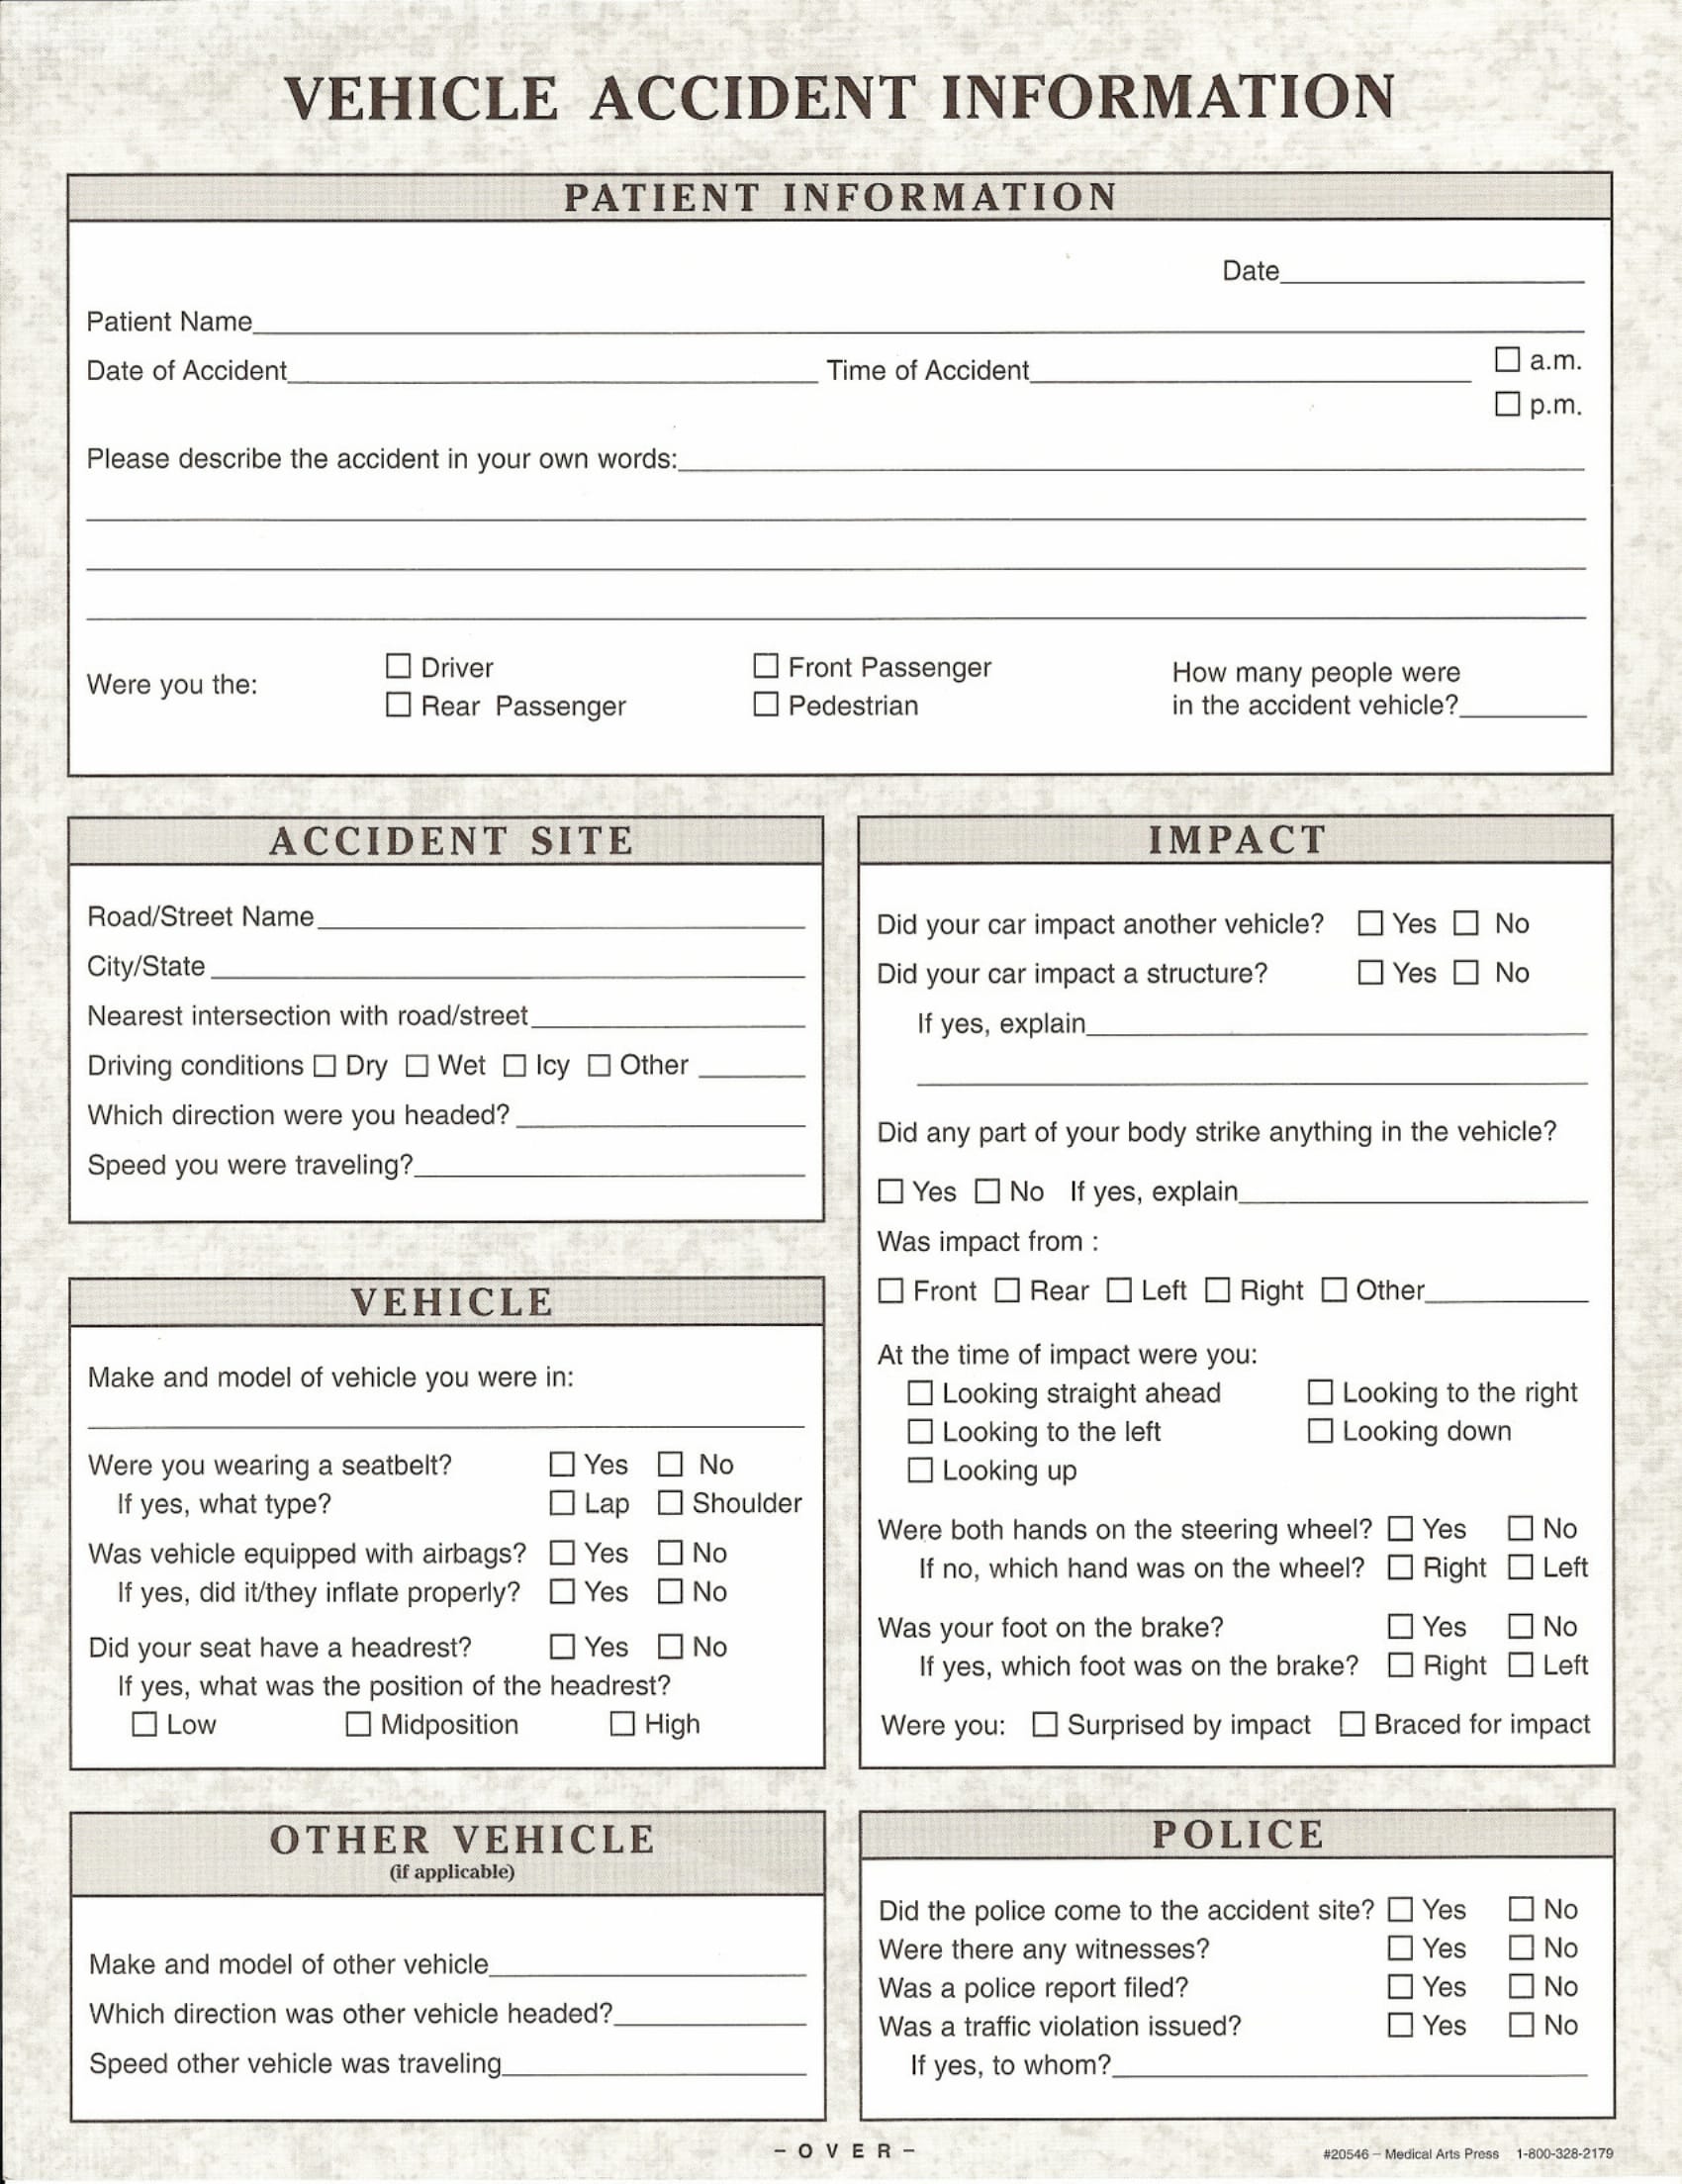 vehicle accident information form template 1